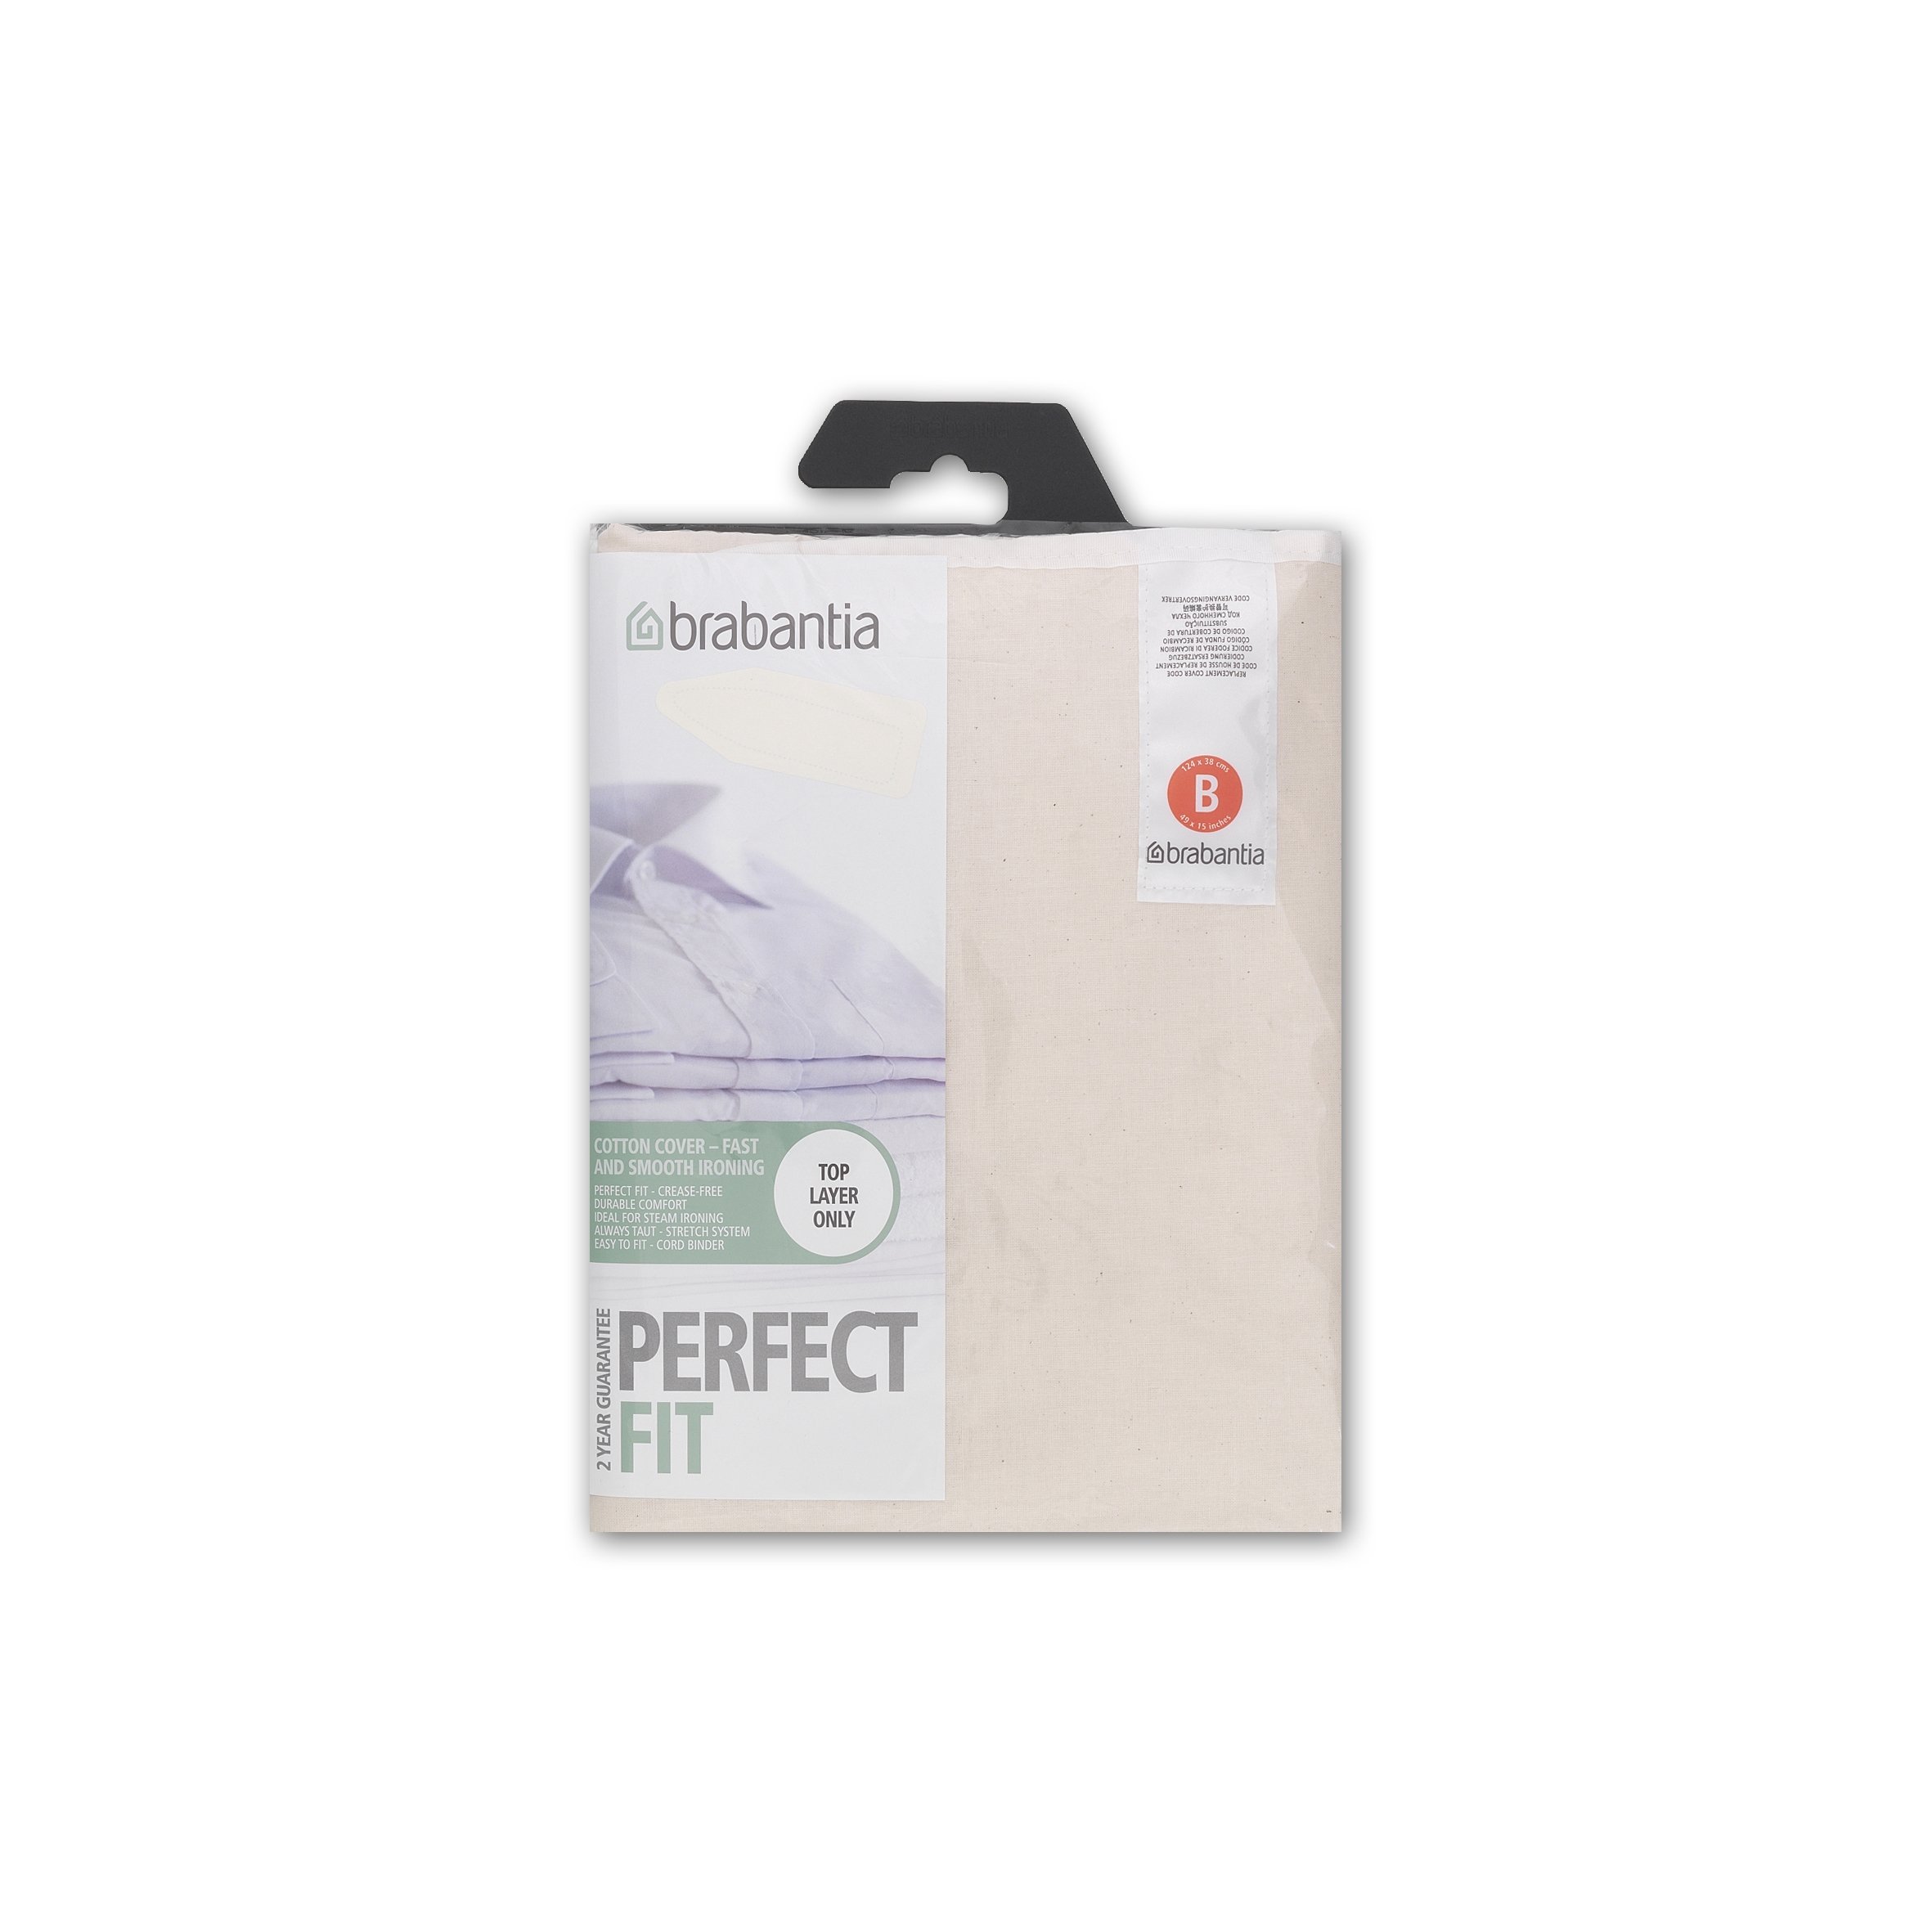 Brabantia Durable Cotton Top Layer Ironing Board Cover, Size B (49 x 15 in), Ecru